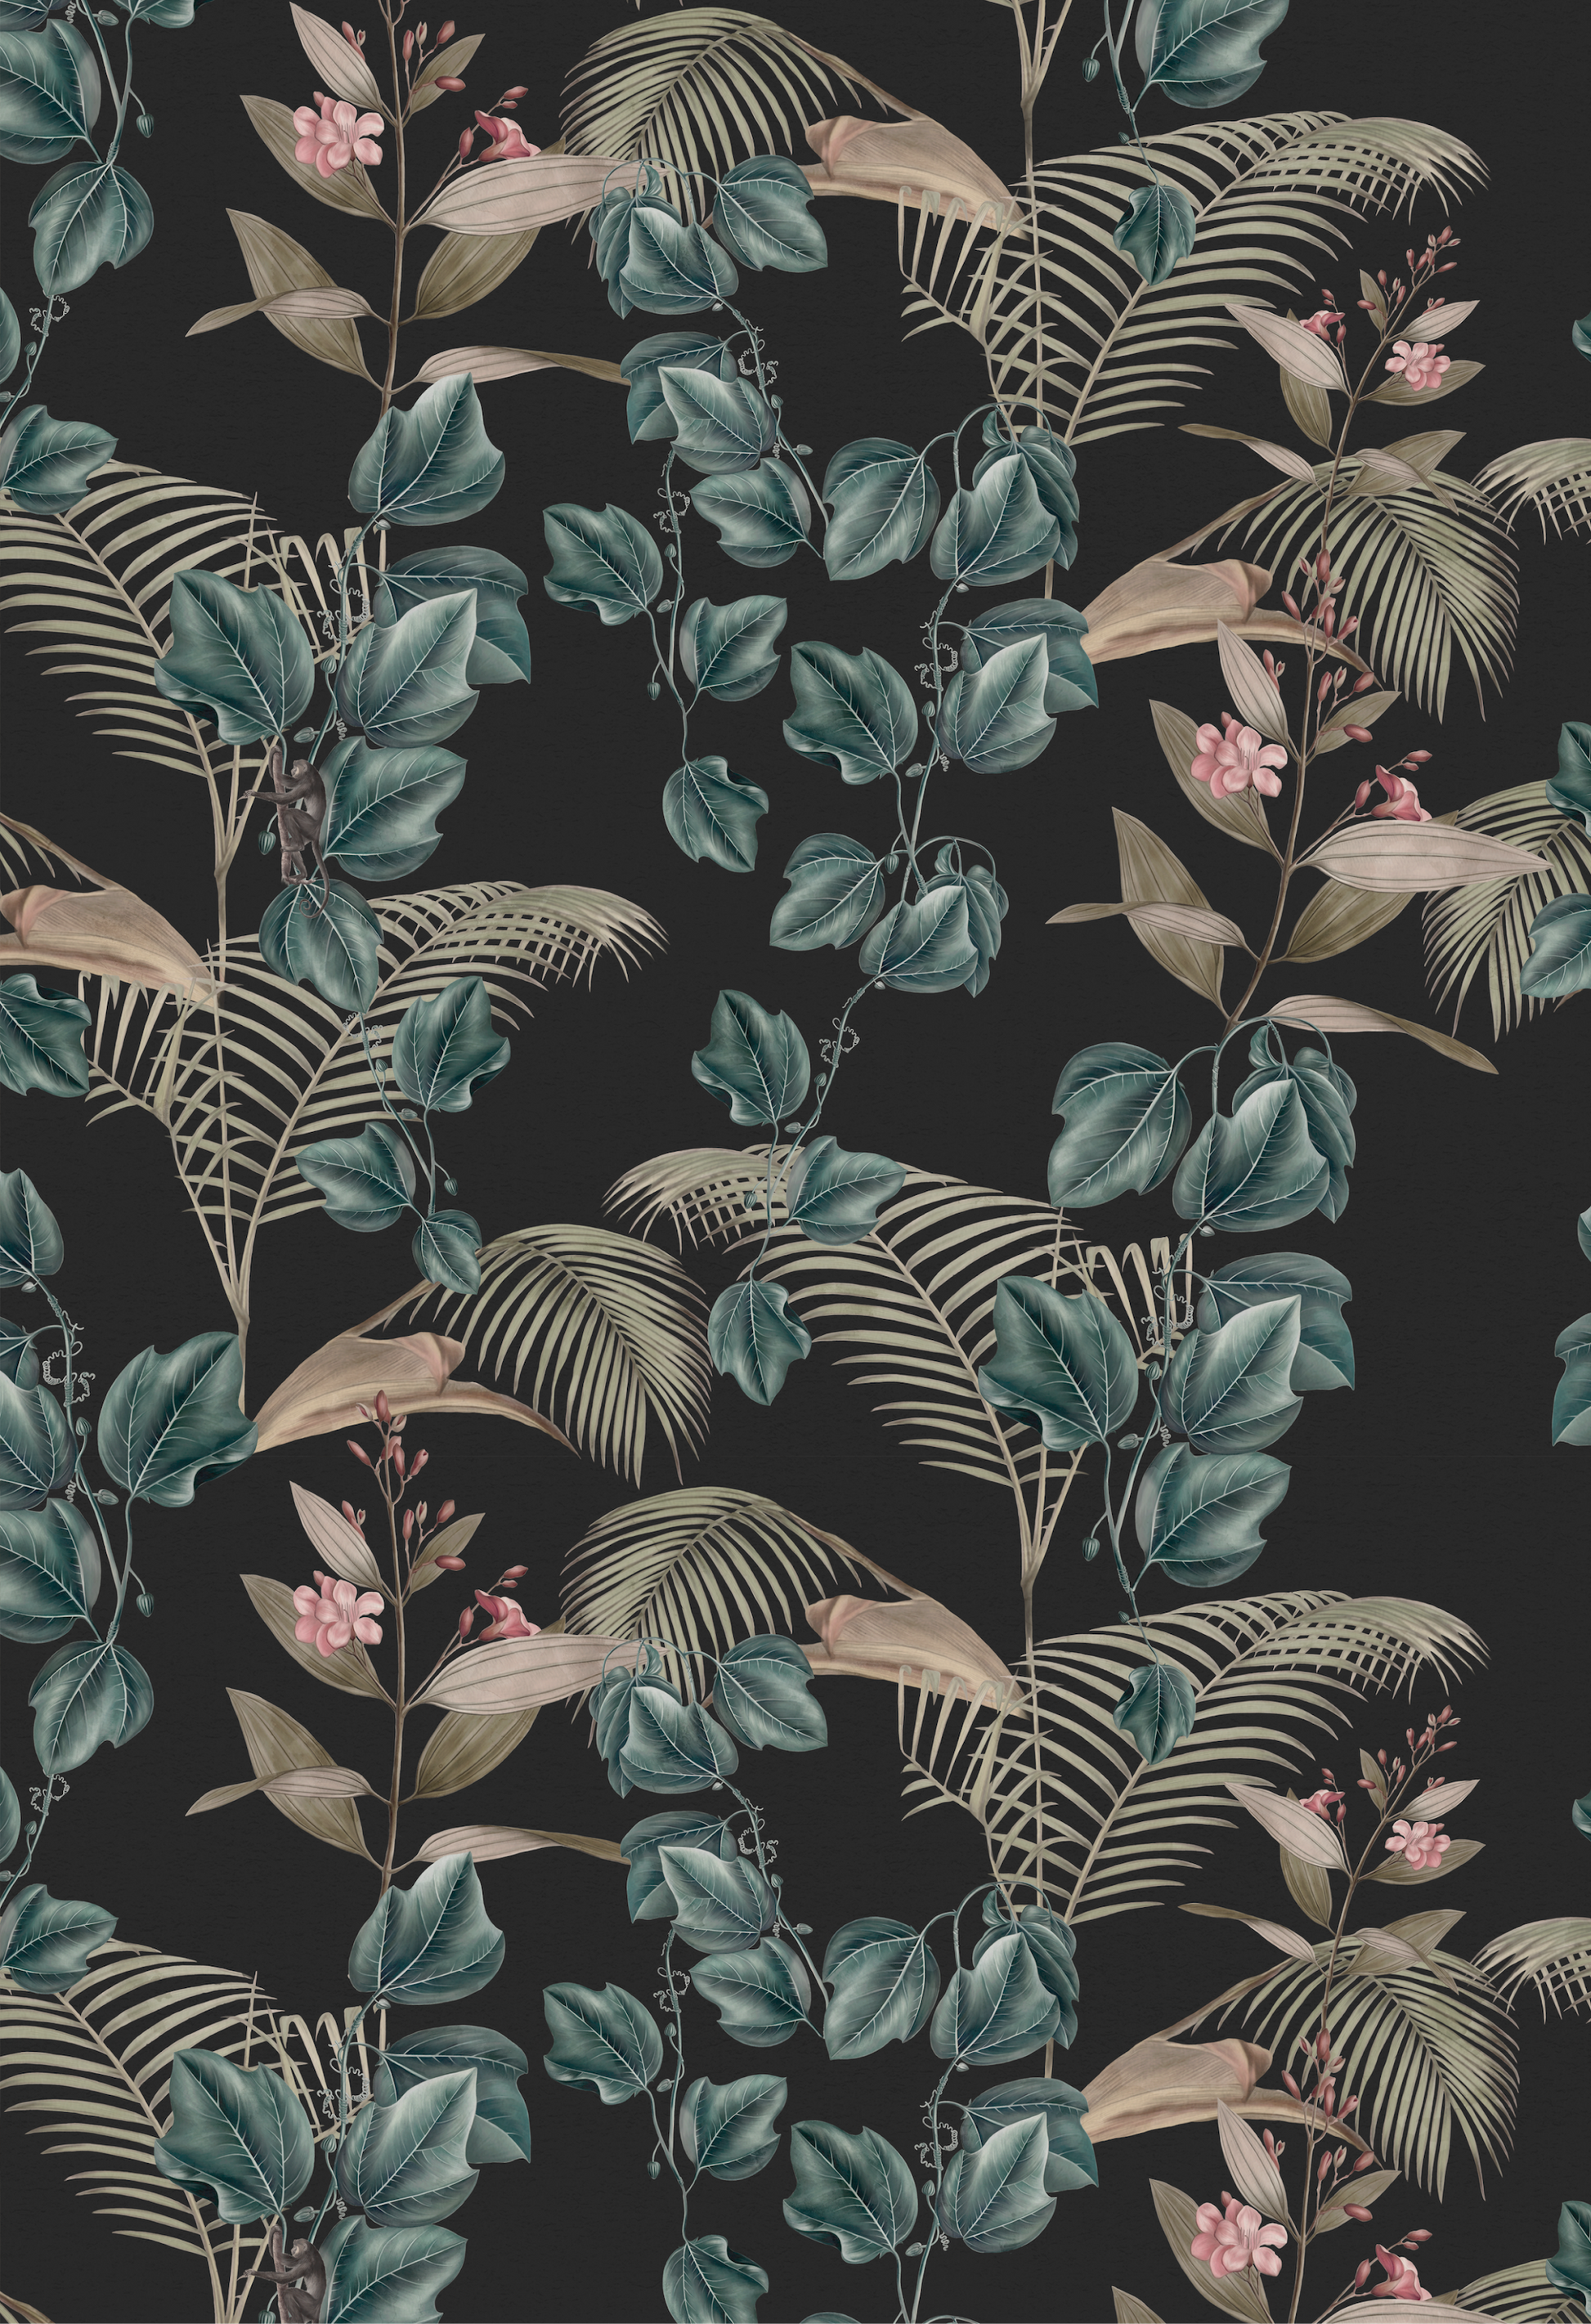 Fauna and flora pattern of creeping ivy and tropical leaves with pink flowers on dark background from Deus ex Gardenia of Wild Ivy Wallpaper in Dusk.